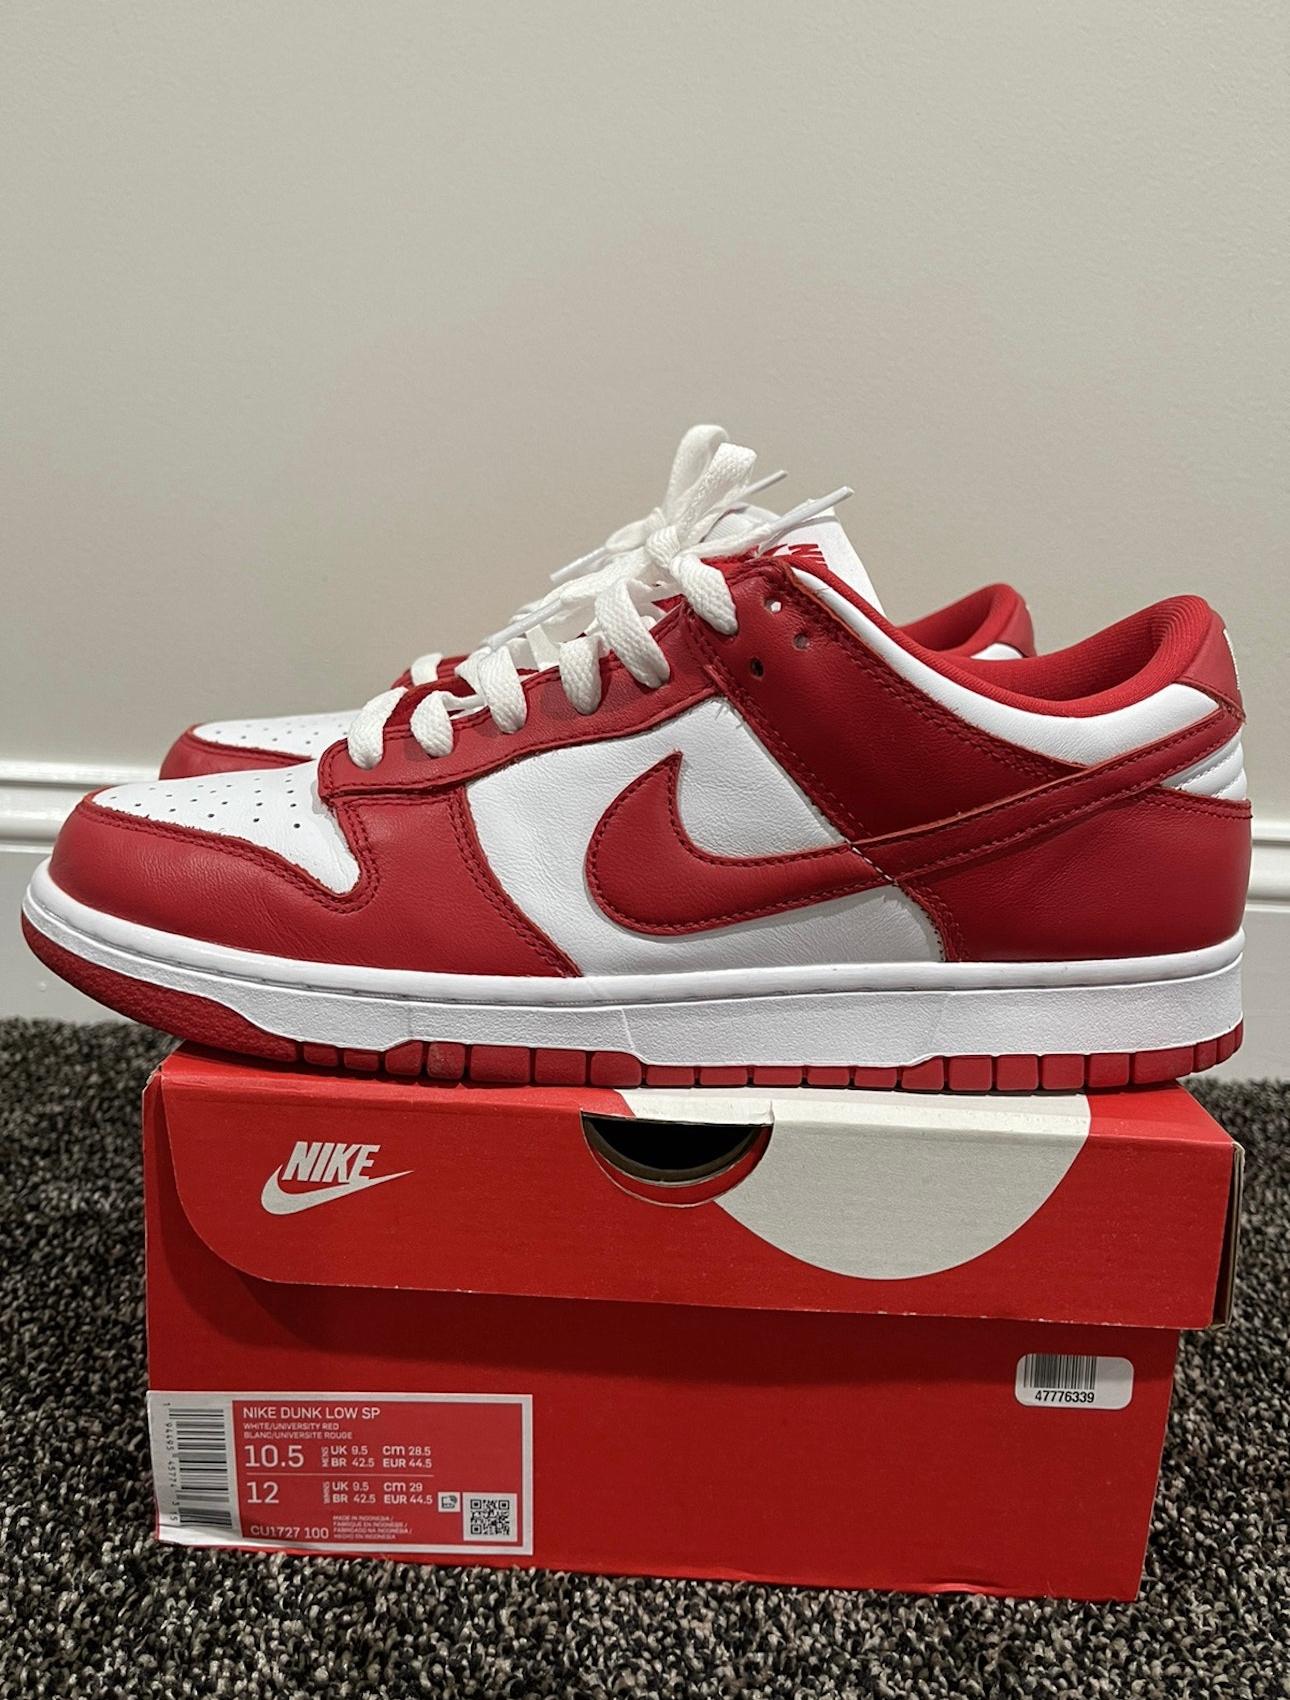 Nike Dunk Low Retro SP “St. John’s” Red Varsity
Size 10.5
Og all
Excellent condition (minus a slight mark on toebox; see pics)